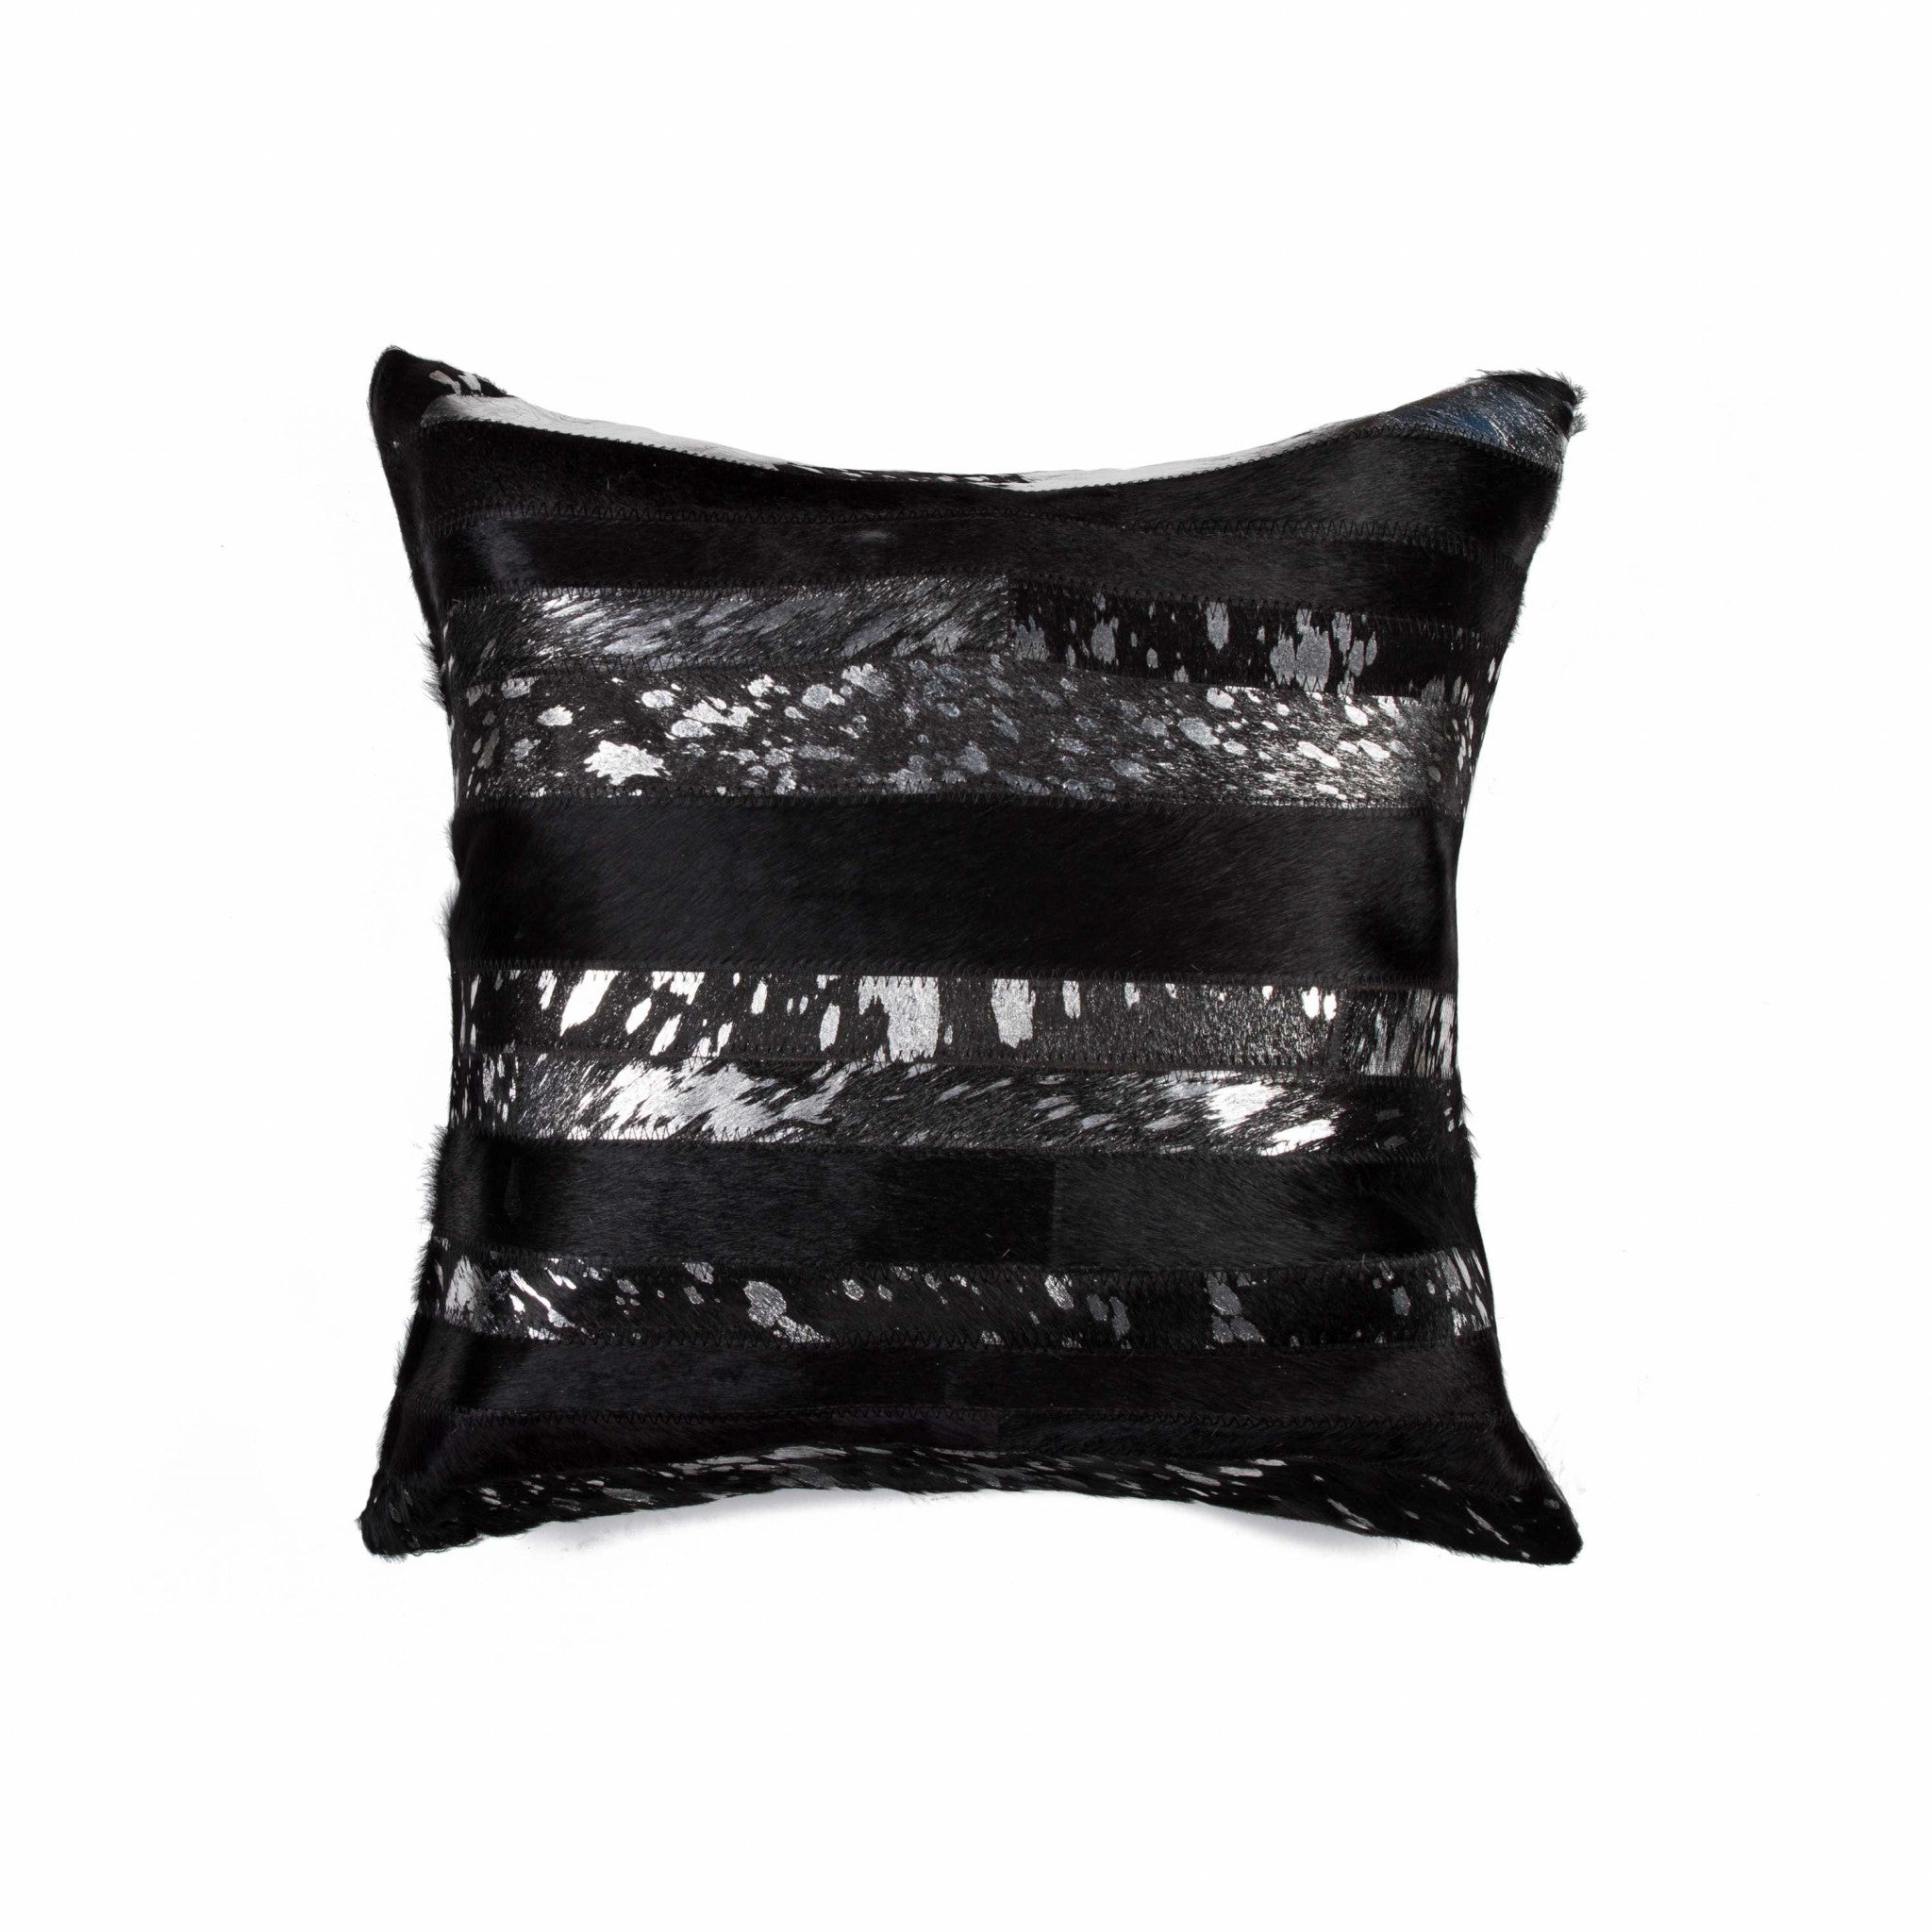 18" X 18" X 5" Black And Silver  Pillow